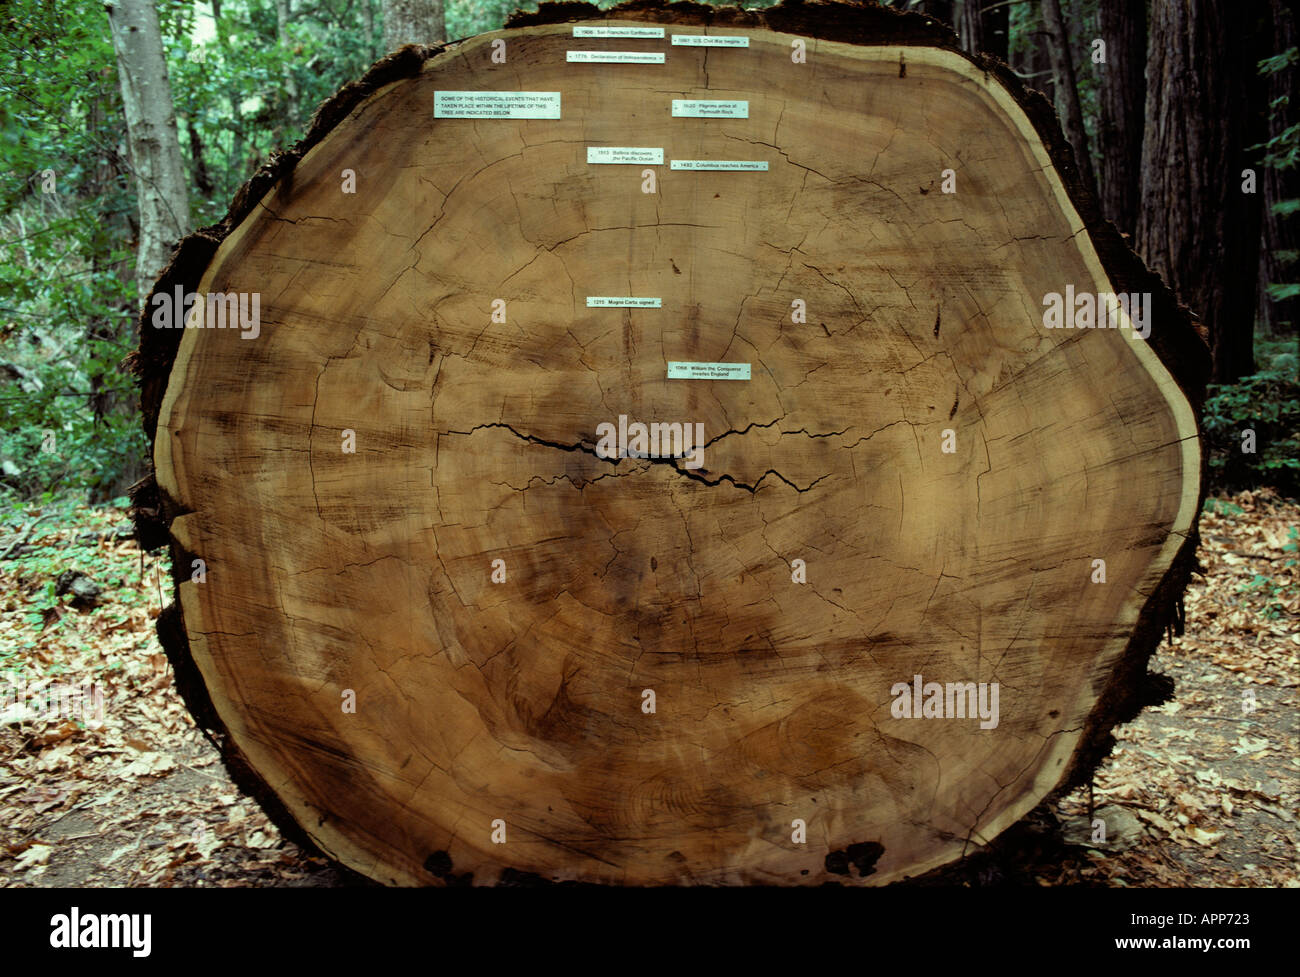 Cross-section of giant Redwood tree with tree rings and explanations of highlights of past years, Big Sur, California USA Stock Photo